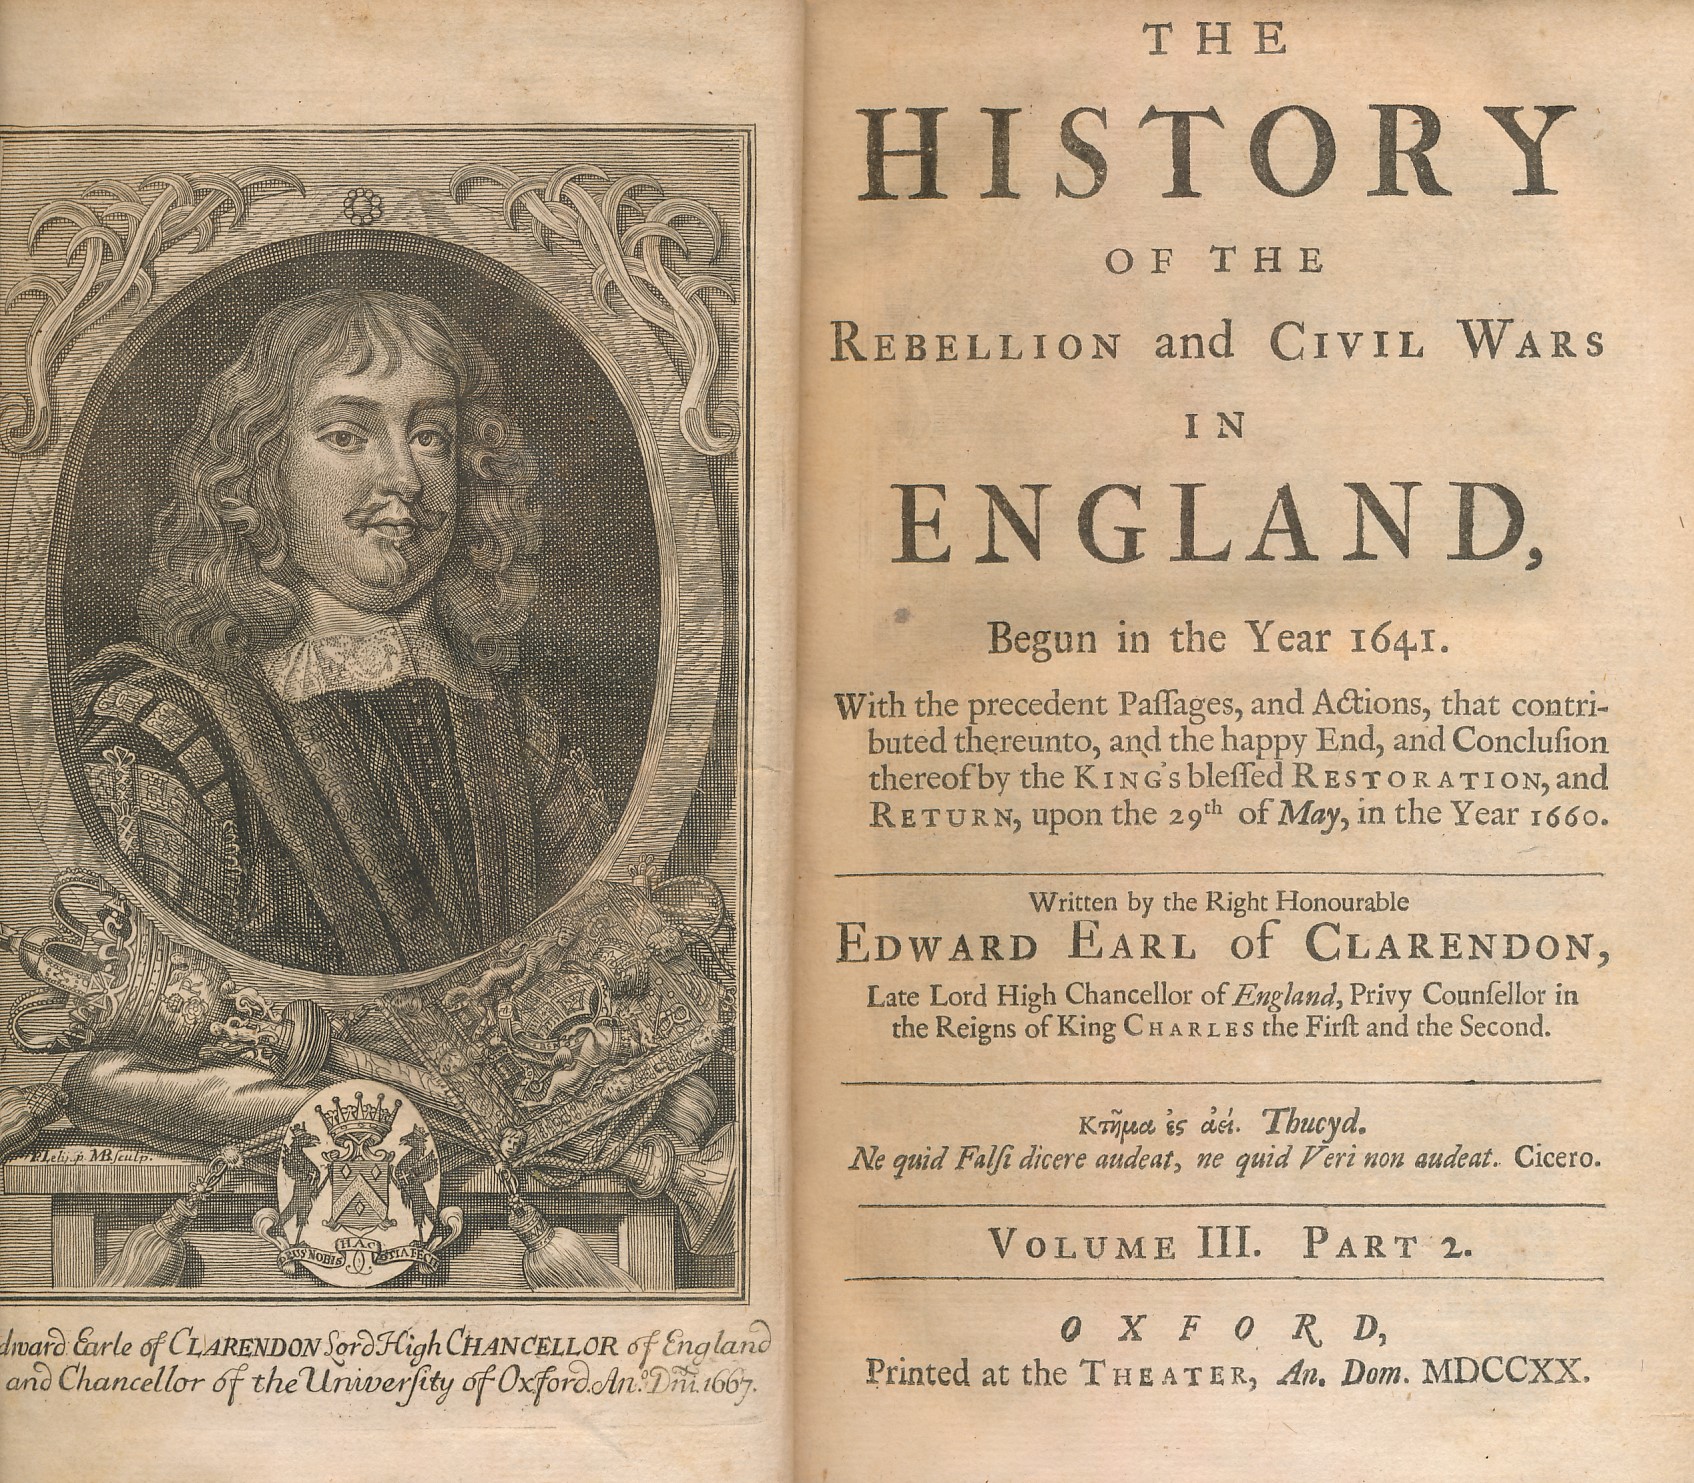 The History of the Rebellion and Civil Wars in England Begun in the Year 1641. 3 volumes bound as 6. Batley edition. 1721.